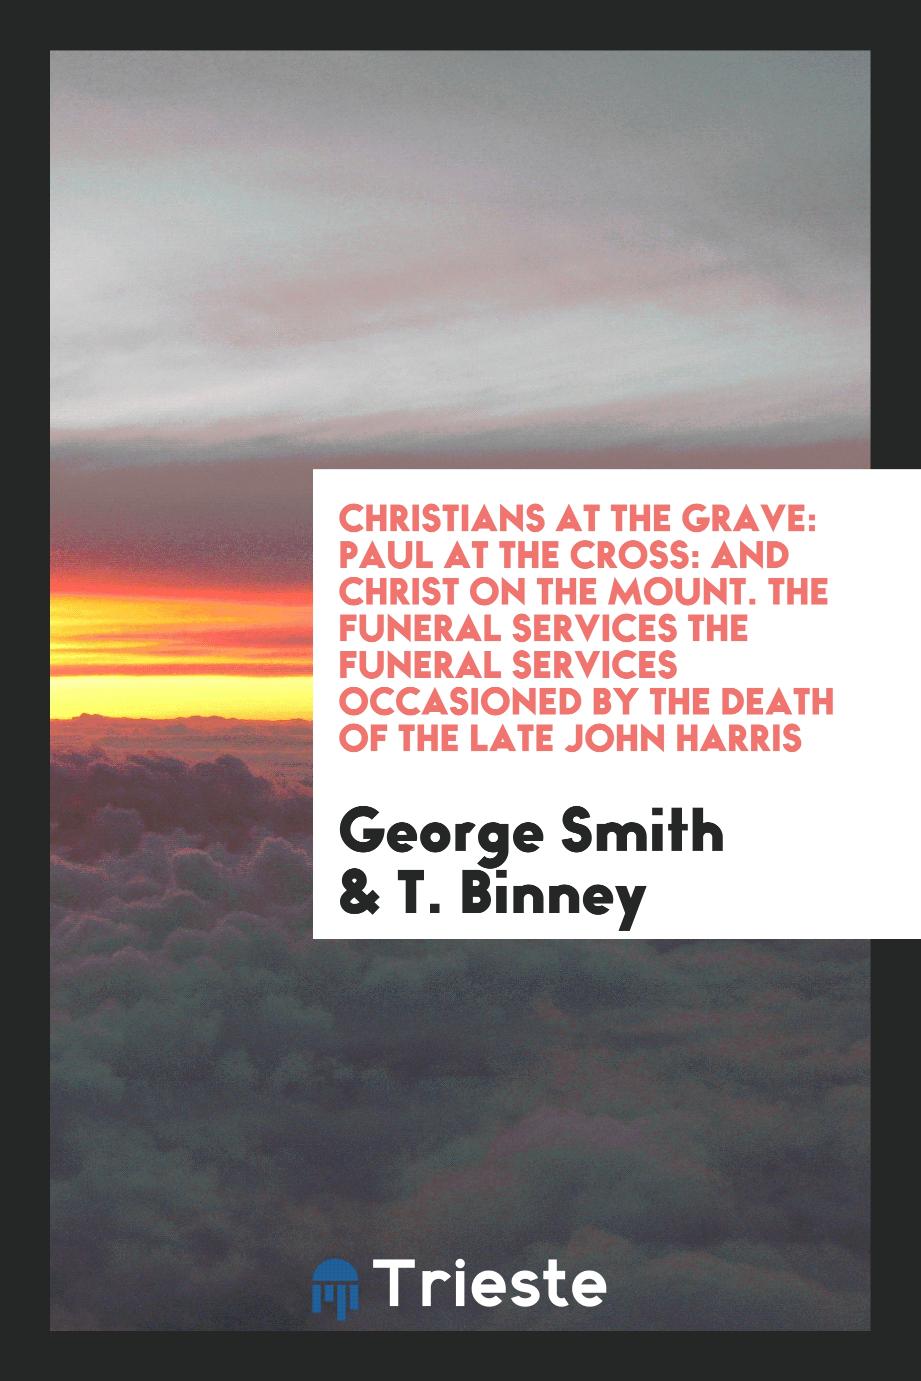 Christians at the Grave: Paul at the Cross: And Christ on the Mount. The Funeral Services the Funeral Services Occasioned by the Death of the Late John Harris